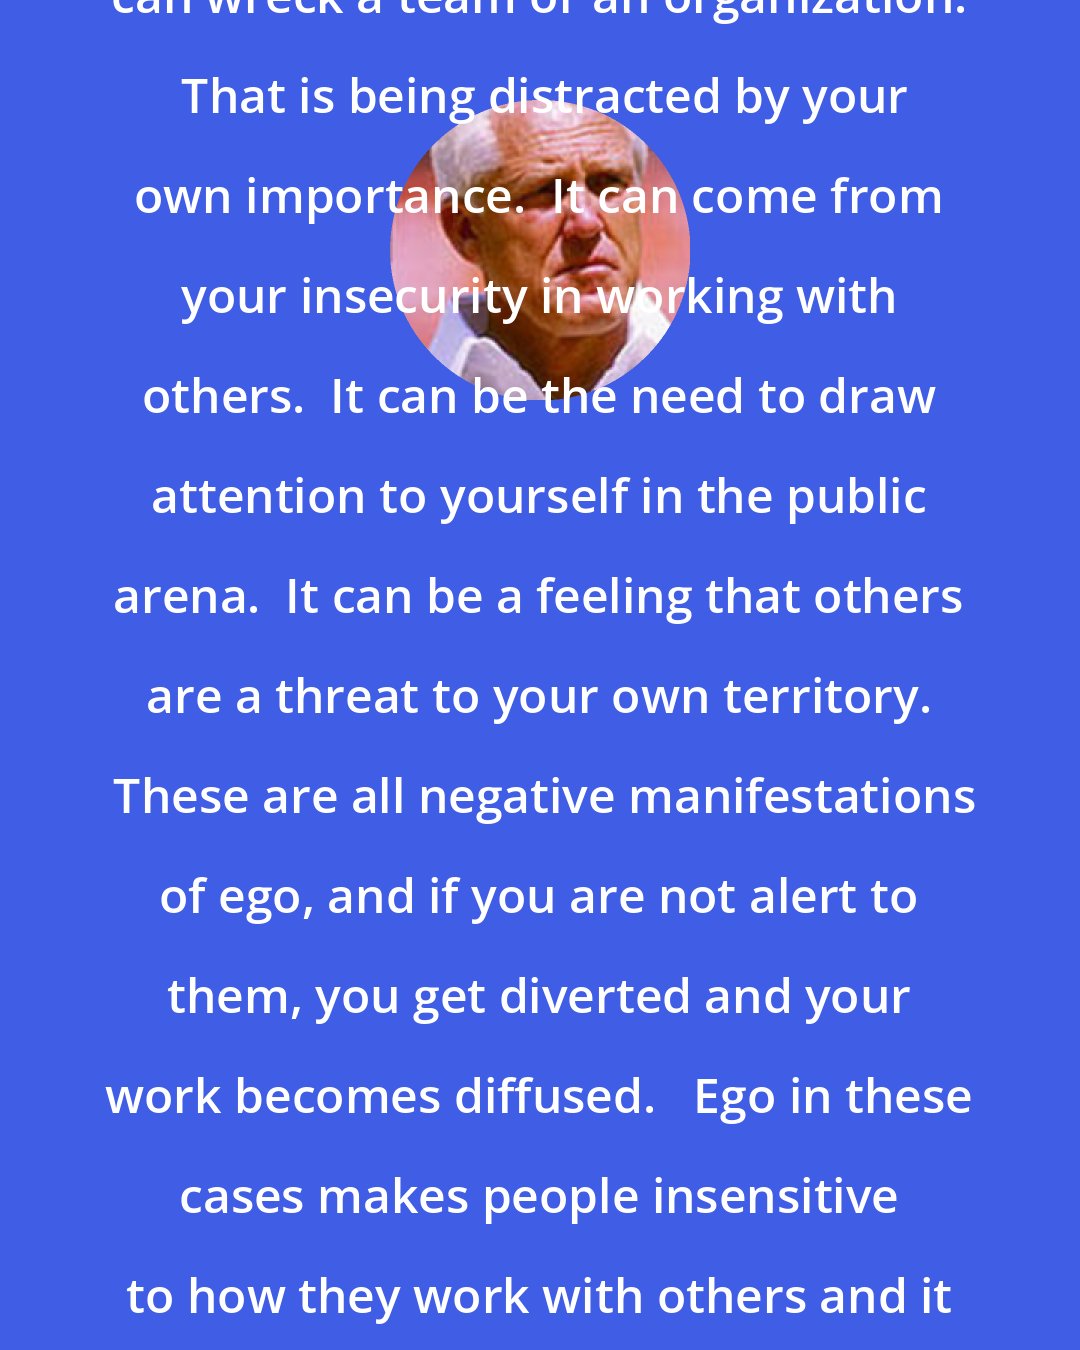 Bill Walsh: There is another side [to ego] that can wreck a team or an organization.  That is being distracted by your own importance.  It can come from your insecurity in working with others.  It can be the need to draw attention to yourself in the public arena.  It can be a feeling that others are a threat to your own territory.  These are all negative manifestations of ego, and if you are not alert to them, you get diverted and your work becomes diffused.   Ego in these cases makes people insensitive to how they work with others and it ends up interfering with the real goal of any group efforts.